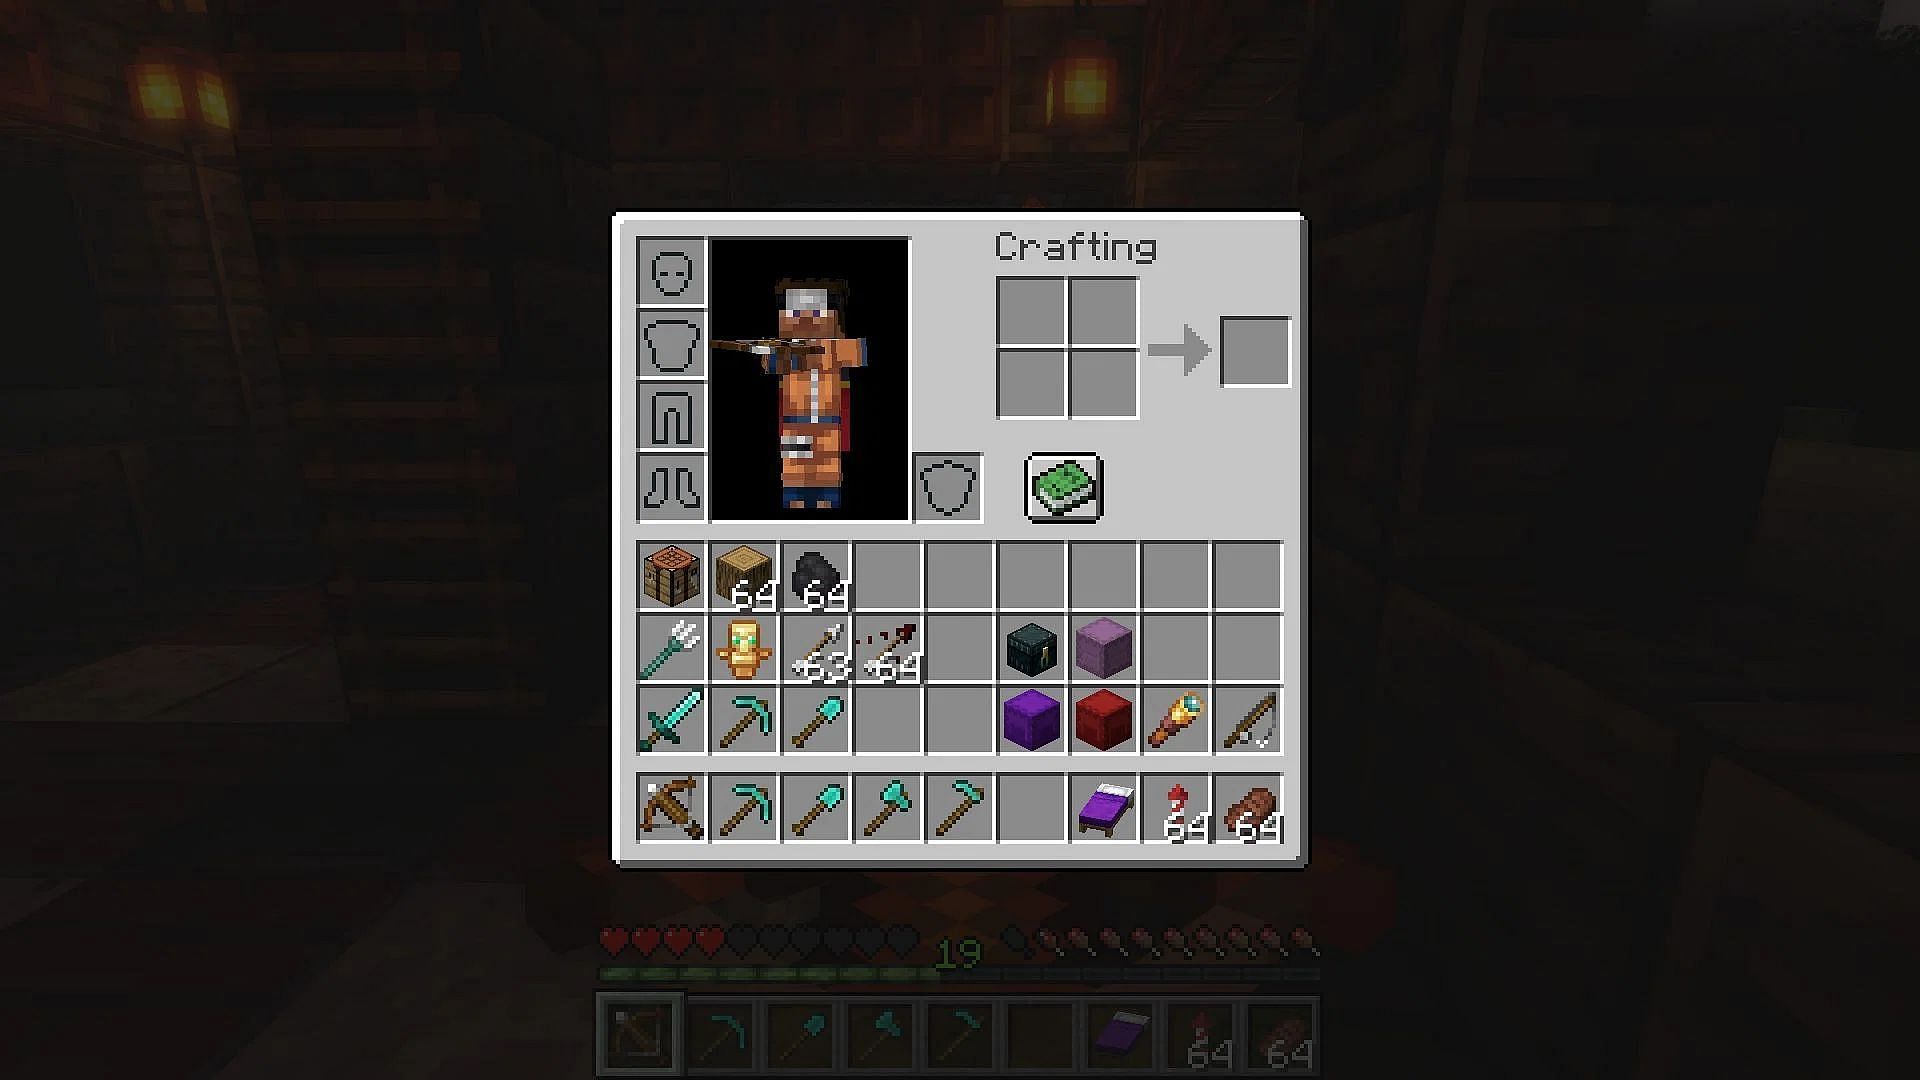 Players should try to keep items in the main inventory organized according to the hotbar in the game (Image via Mojang)